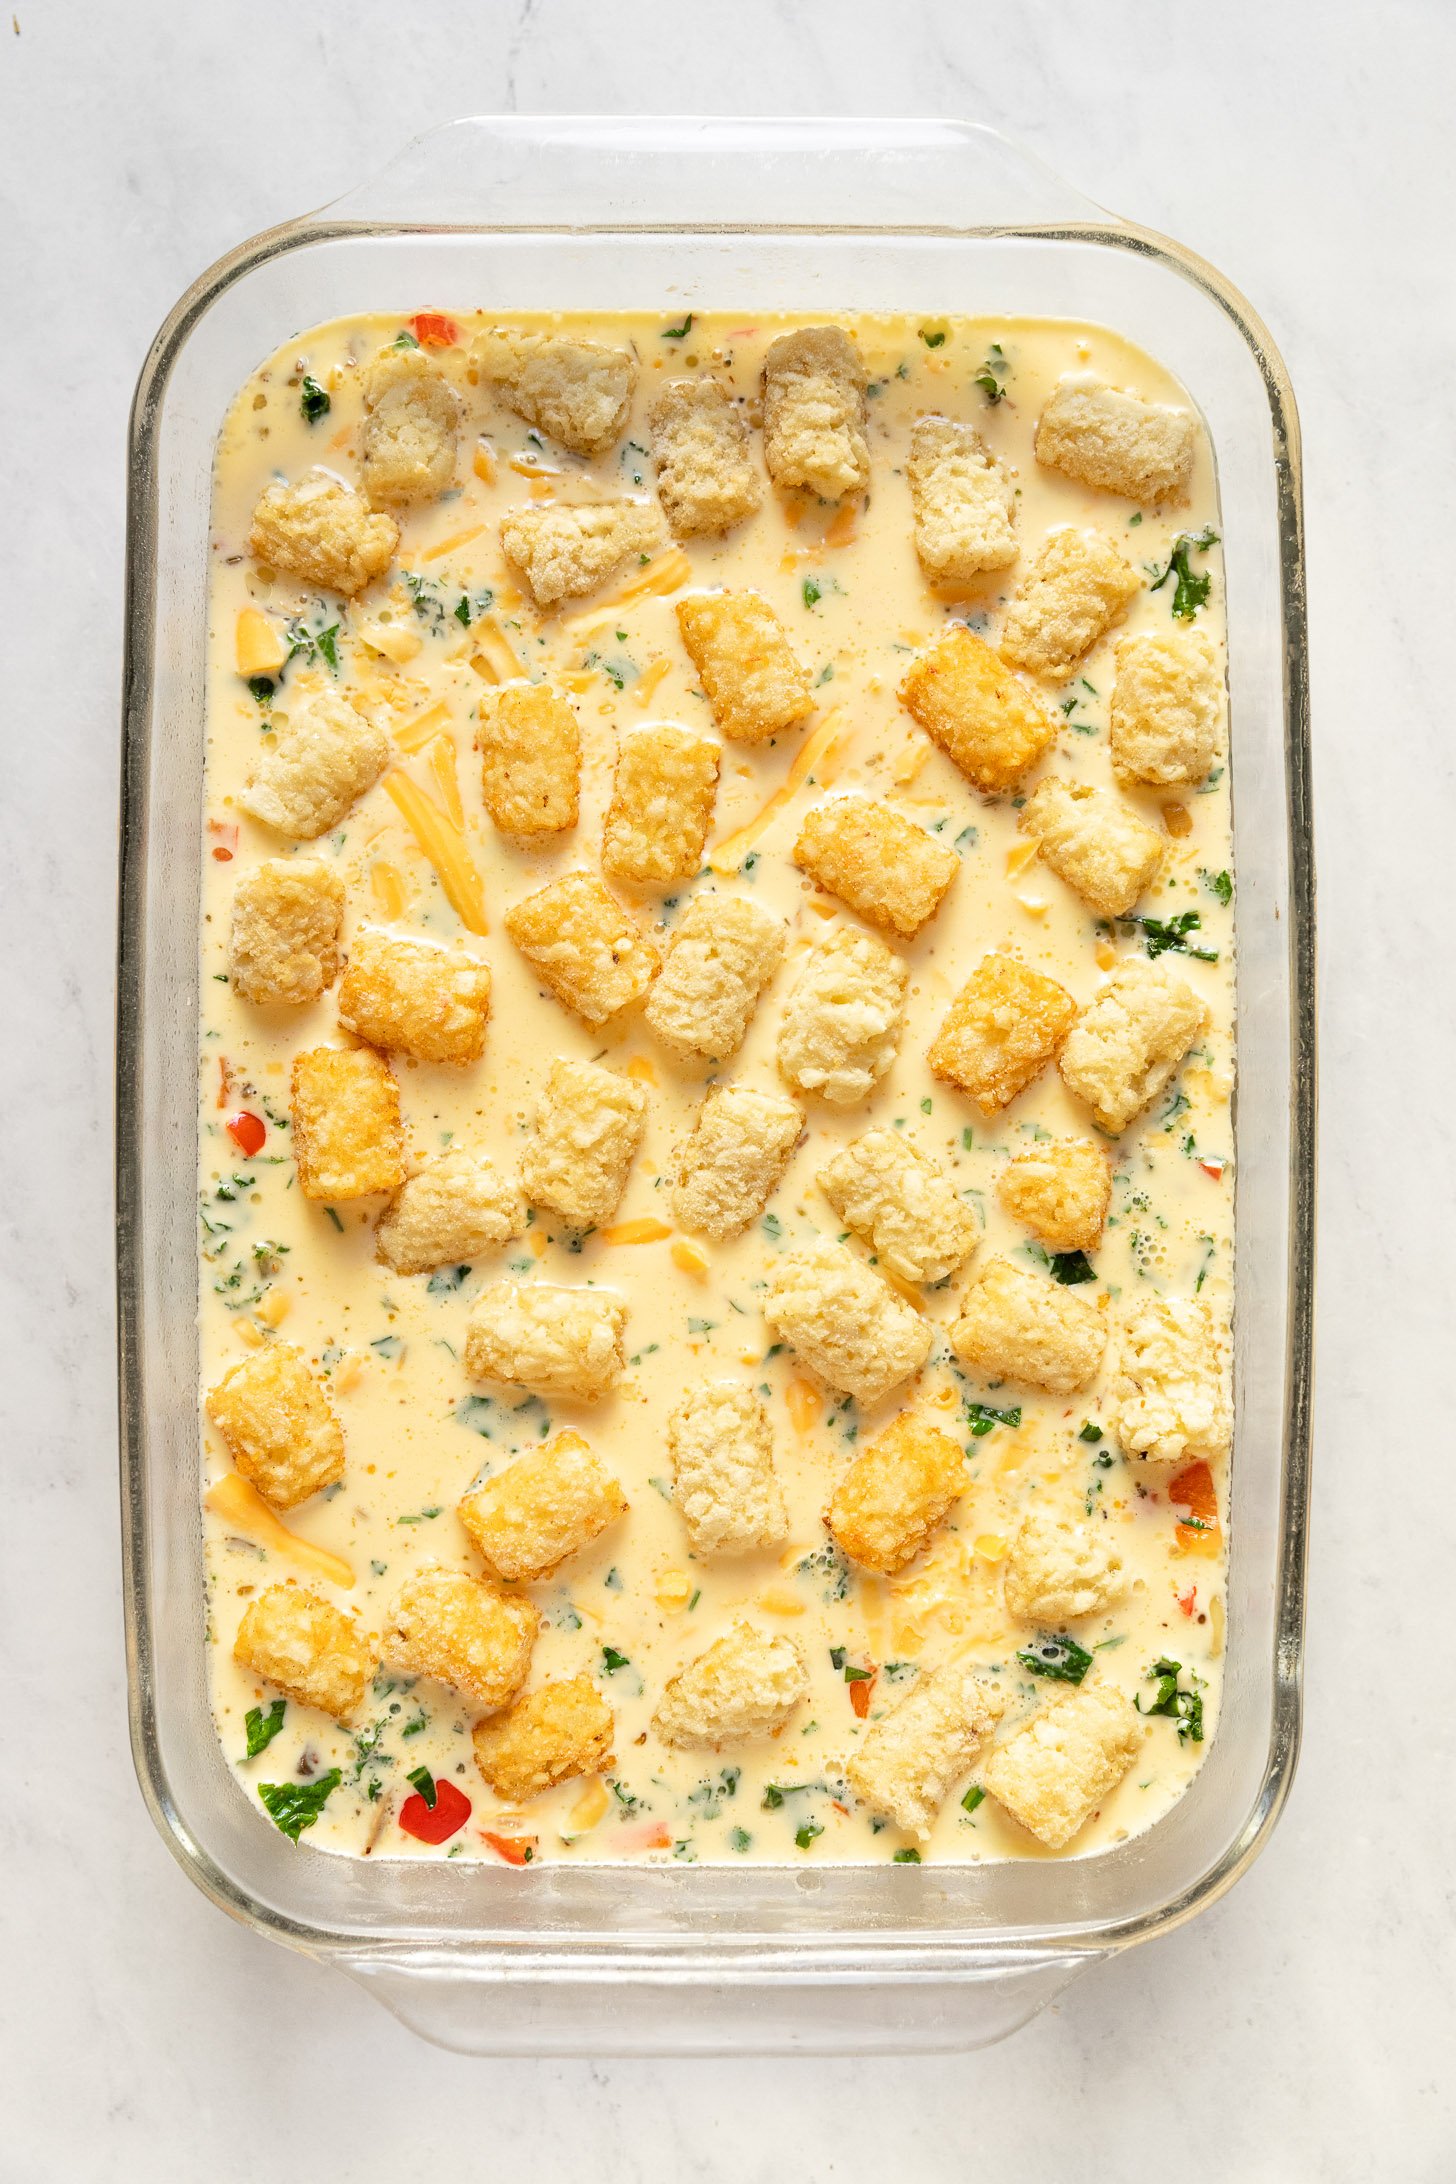 Breakfast casserole with tater tots on top before baking.